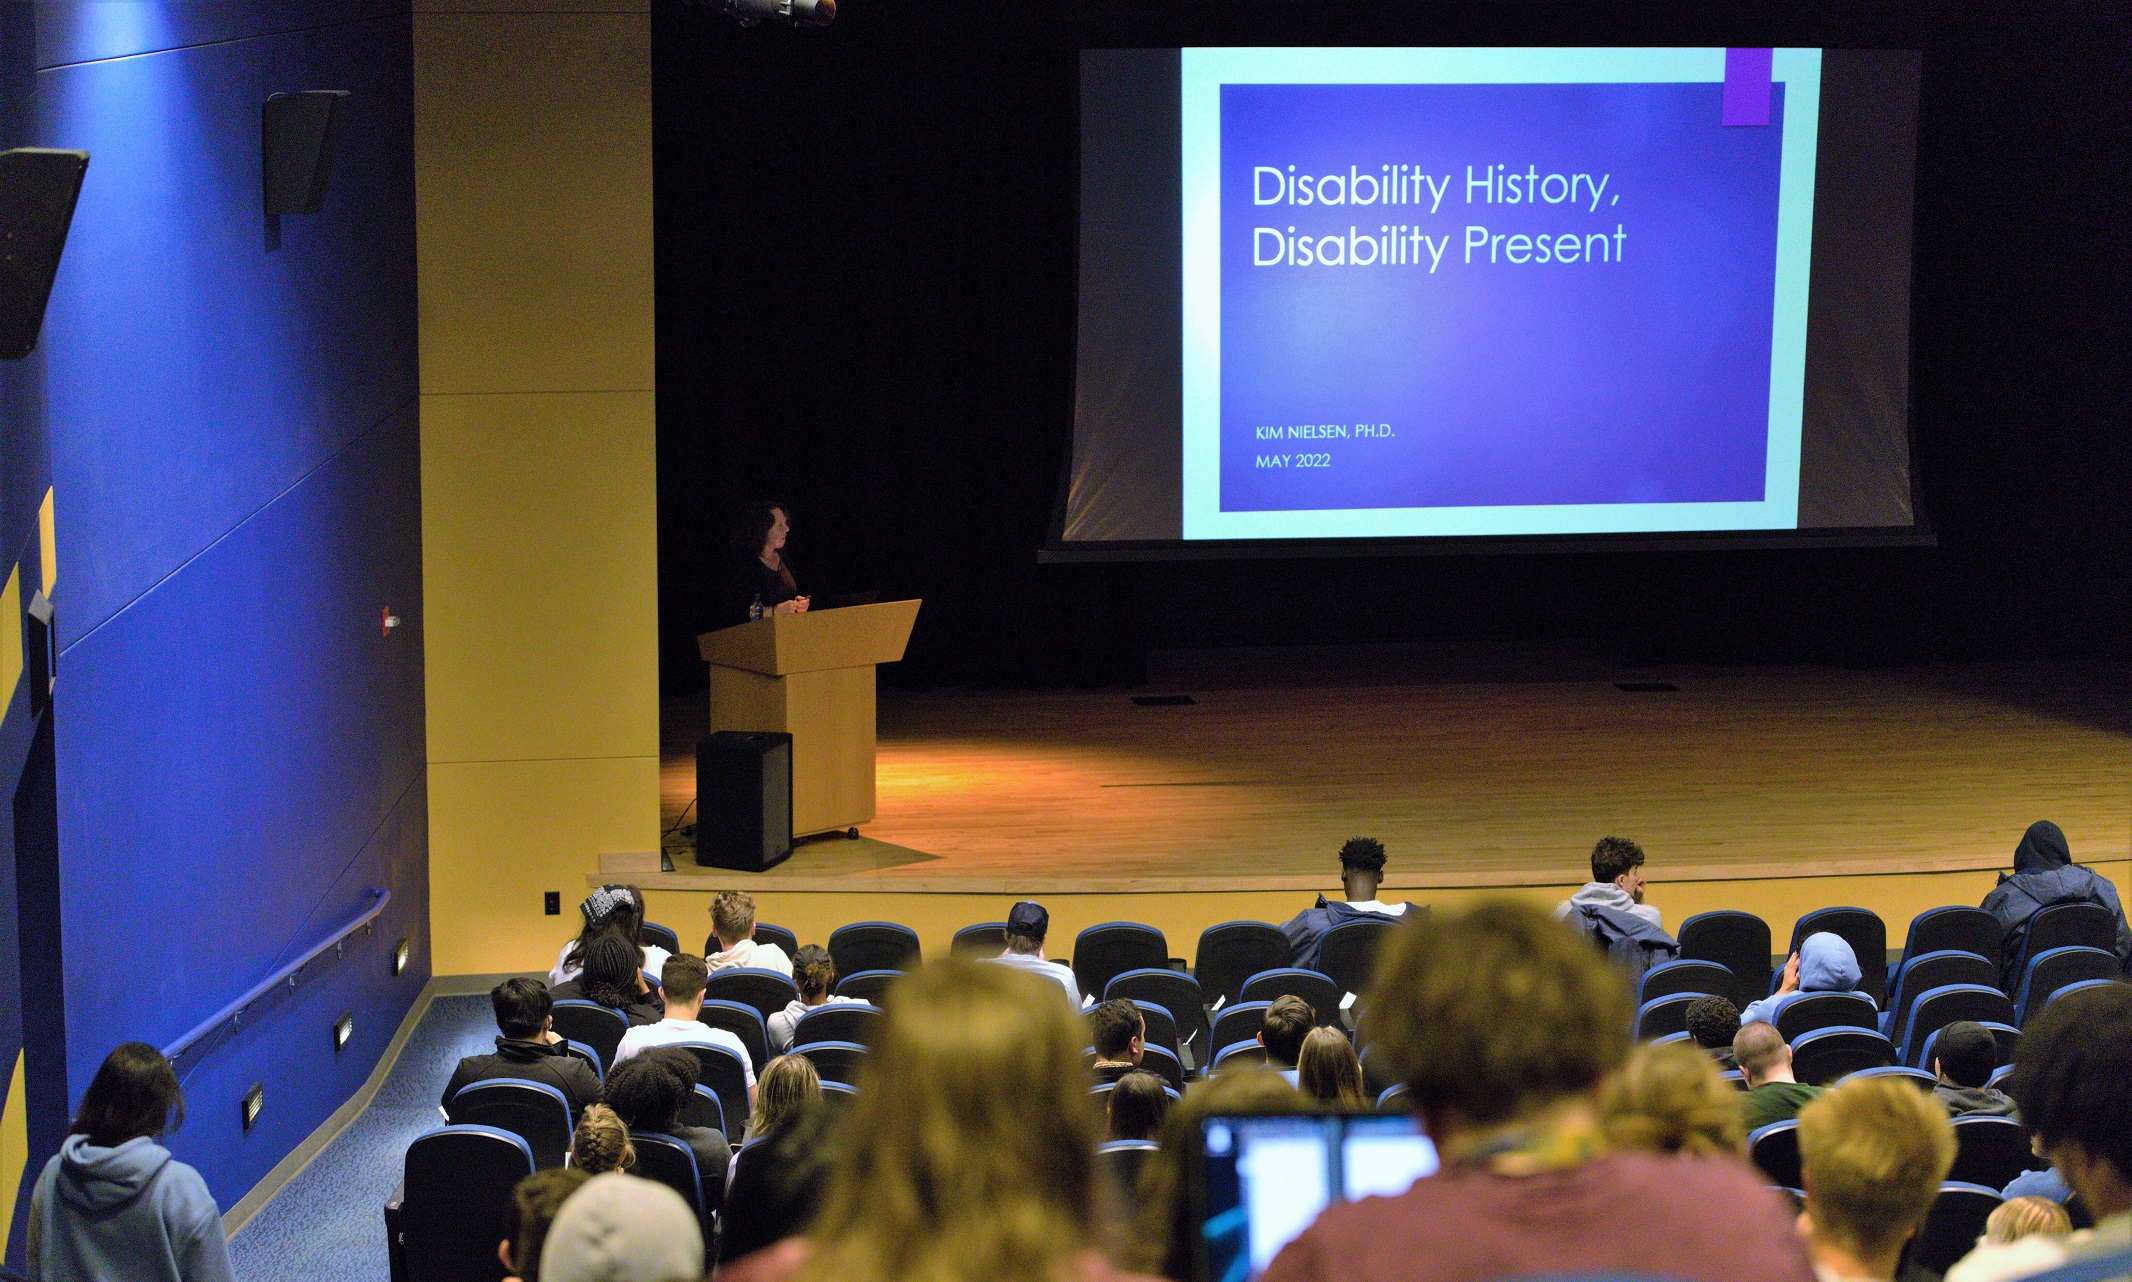 Kim Nielsen stands on a stage behind a podium, with a large screen reading, "Disability History, Disability Today" to the right of her. The photo is taken from partway up theatre seating, so the backs of many students heads are visible between the camera and Nielsen.